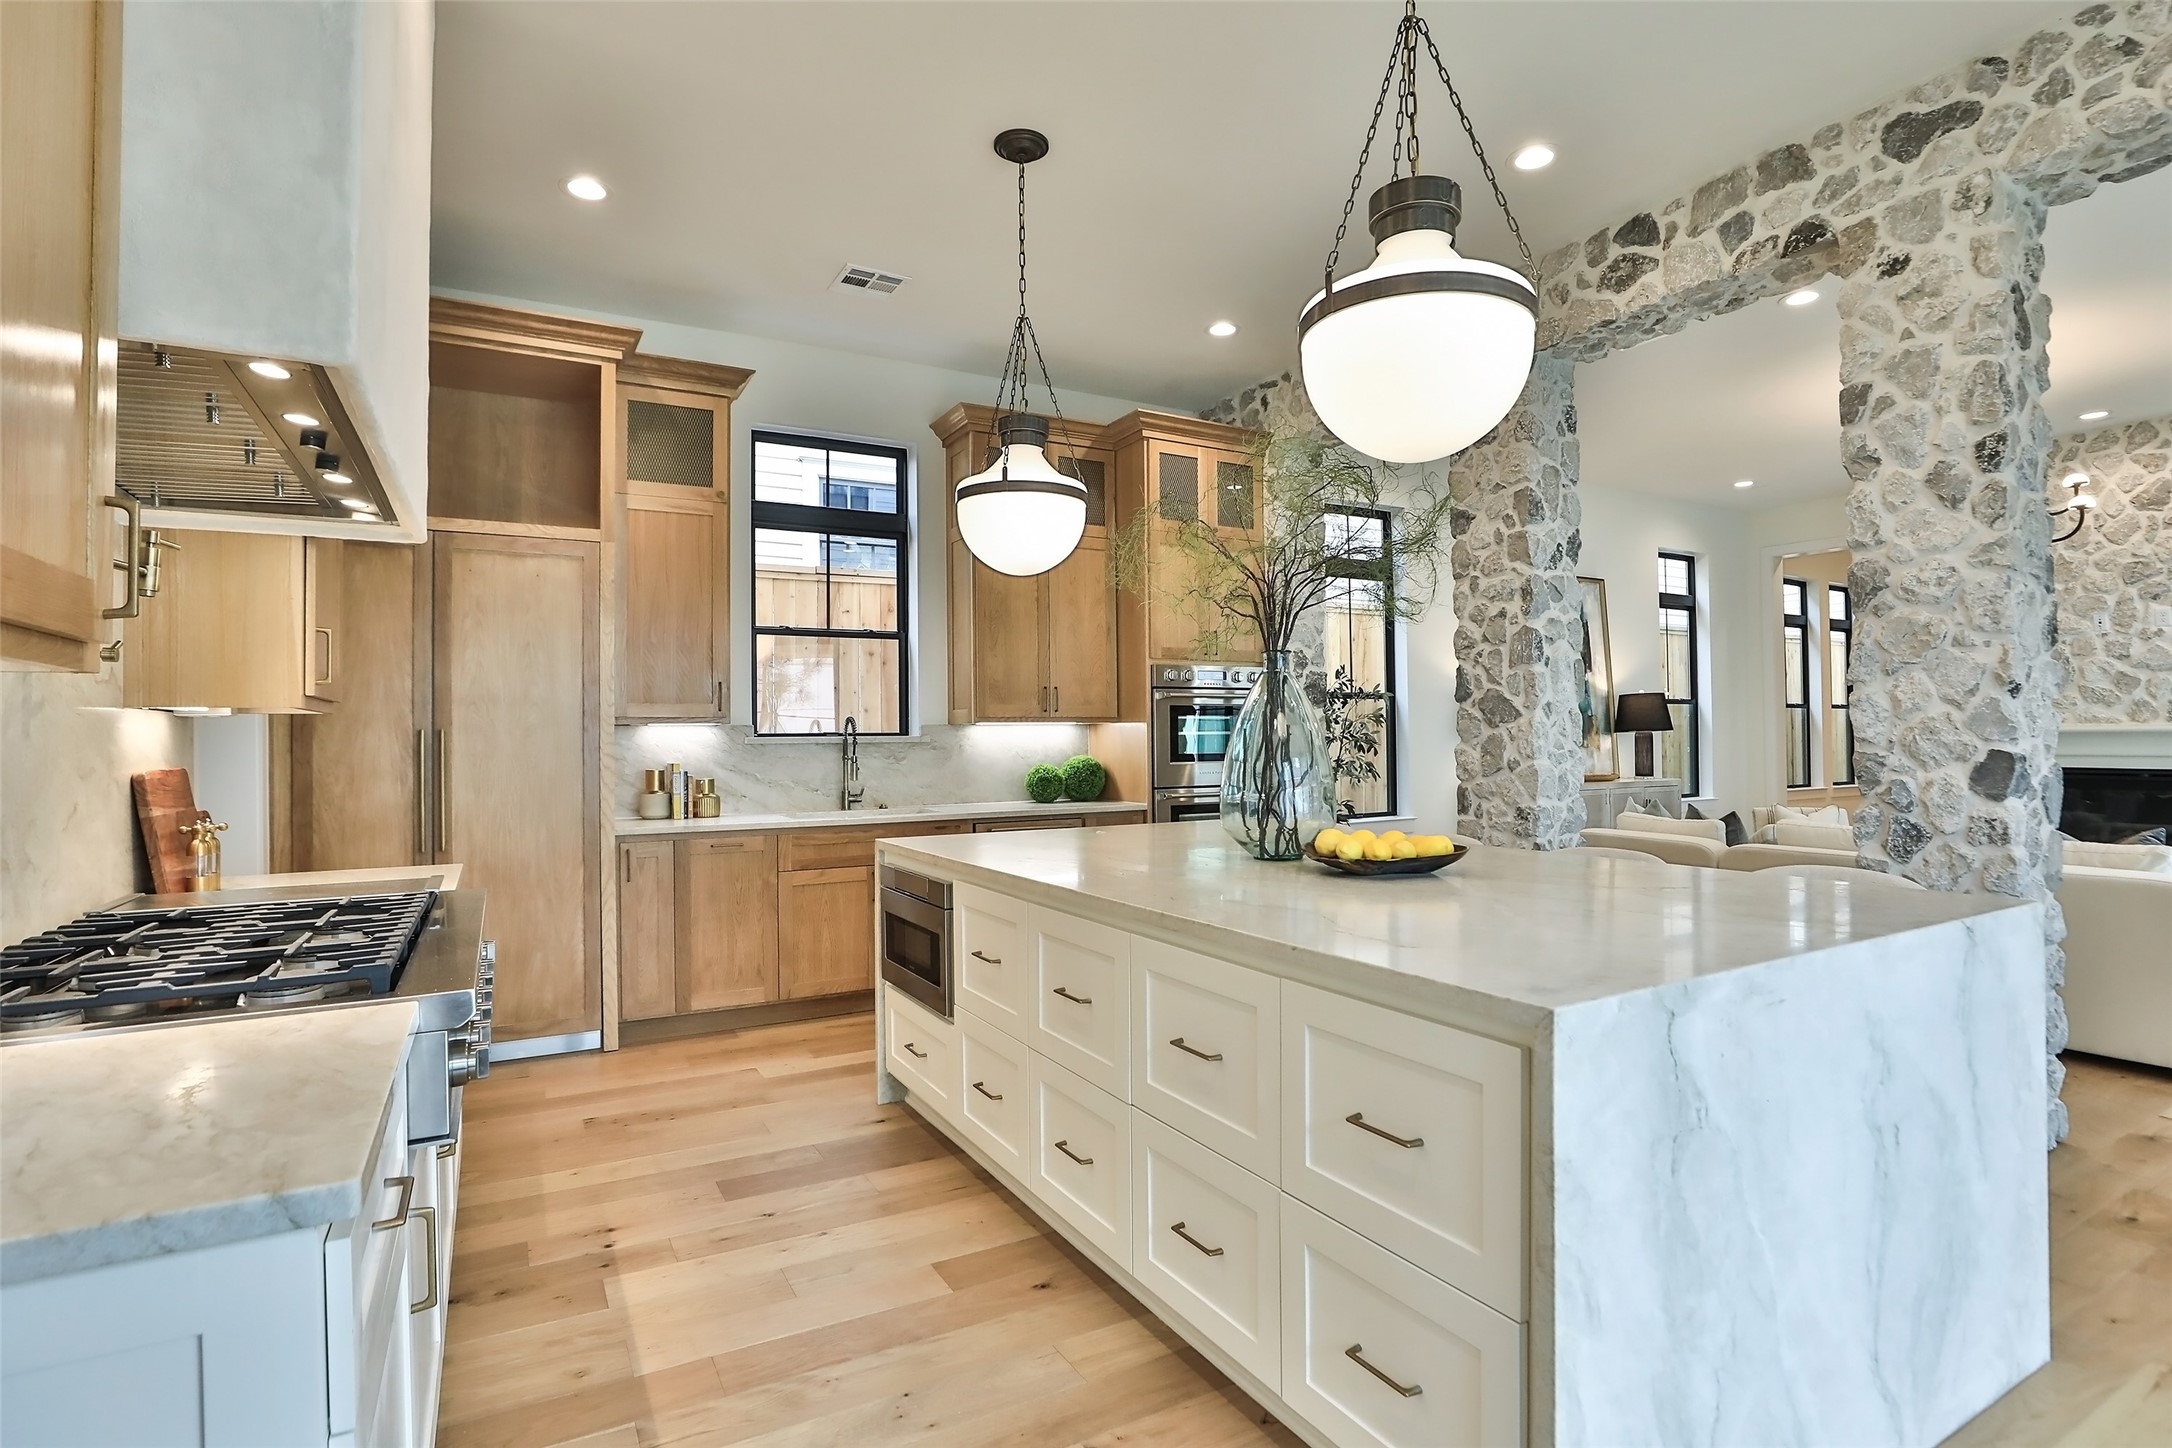 The oversized designer pendants light up the kitchen beautifully. The gas range includes 6-burners plus a griddle. A convenient pot filler is in the custom back splash.